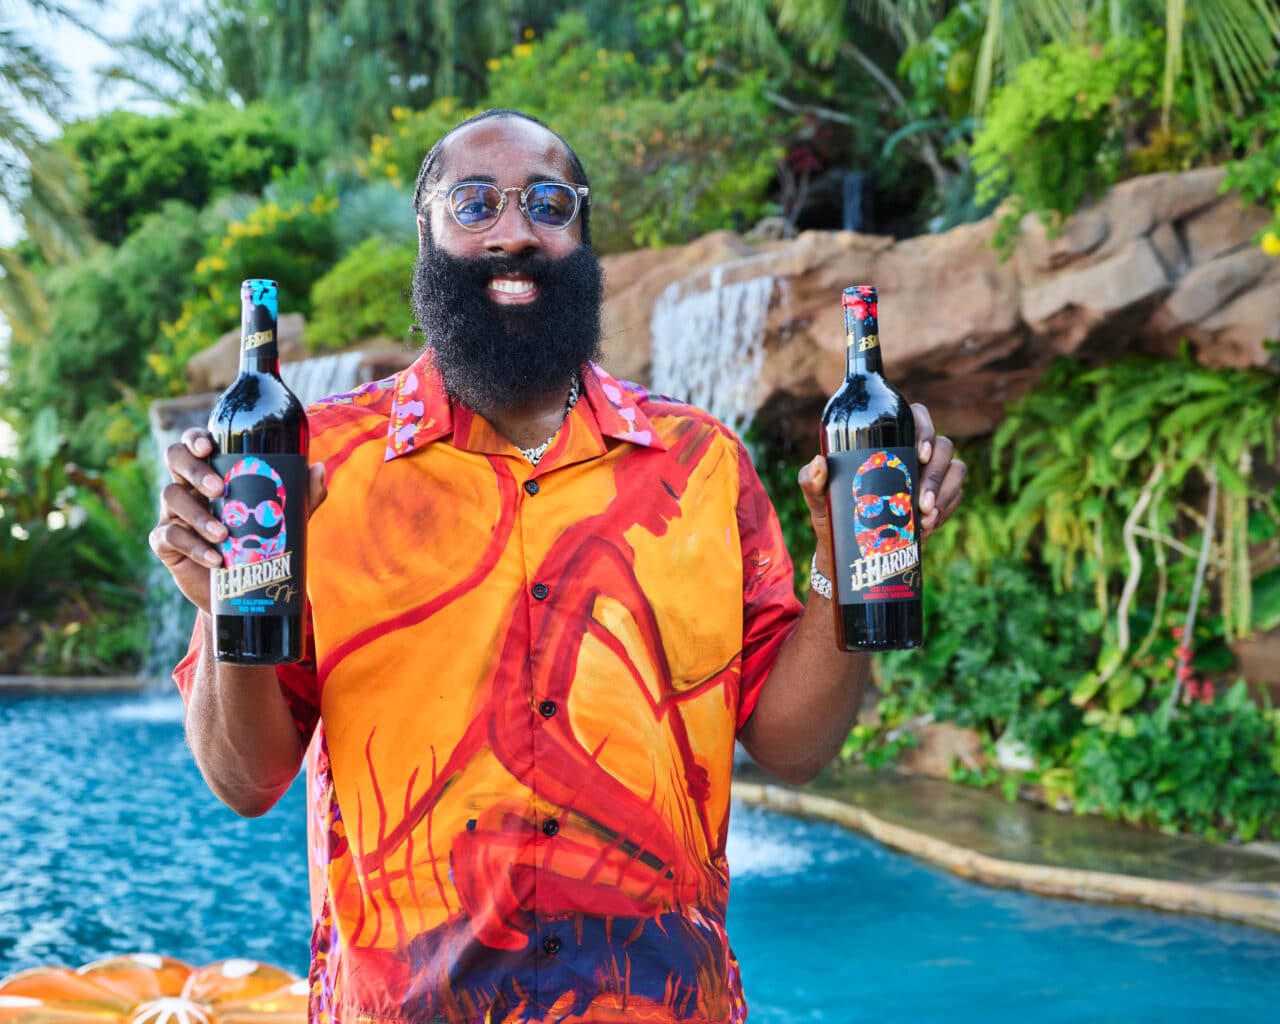 Basketball star James Harden holding J-Harden Wines recently launched